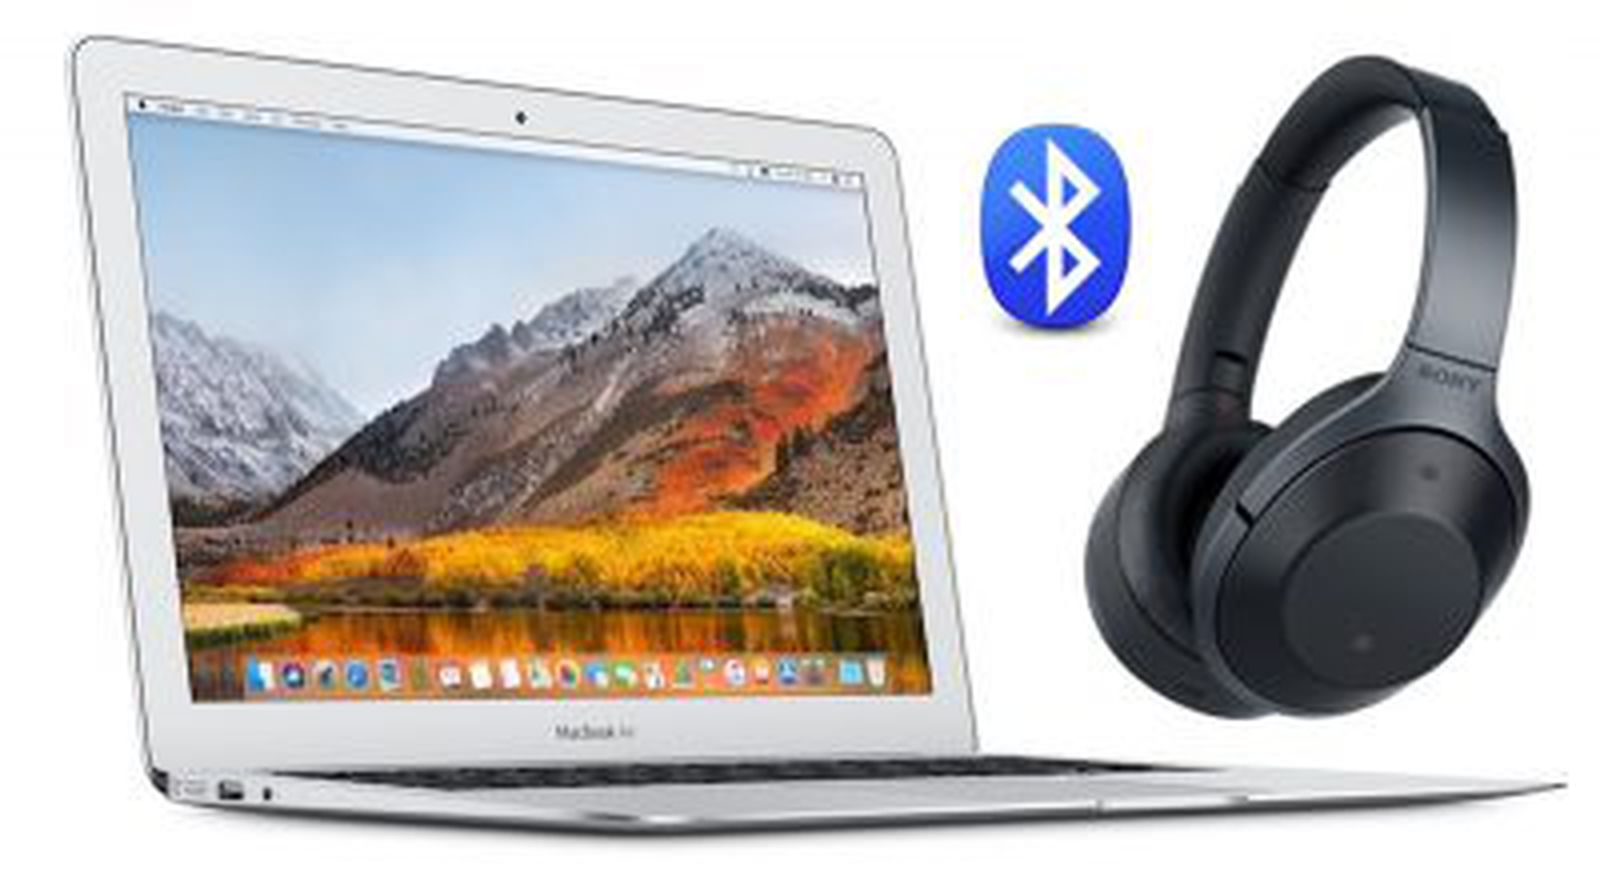 enable network access for bluetooth on mac osx